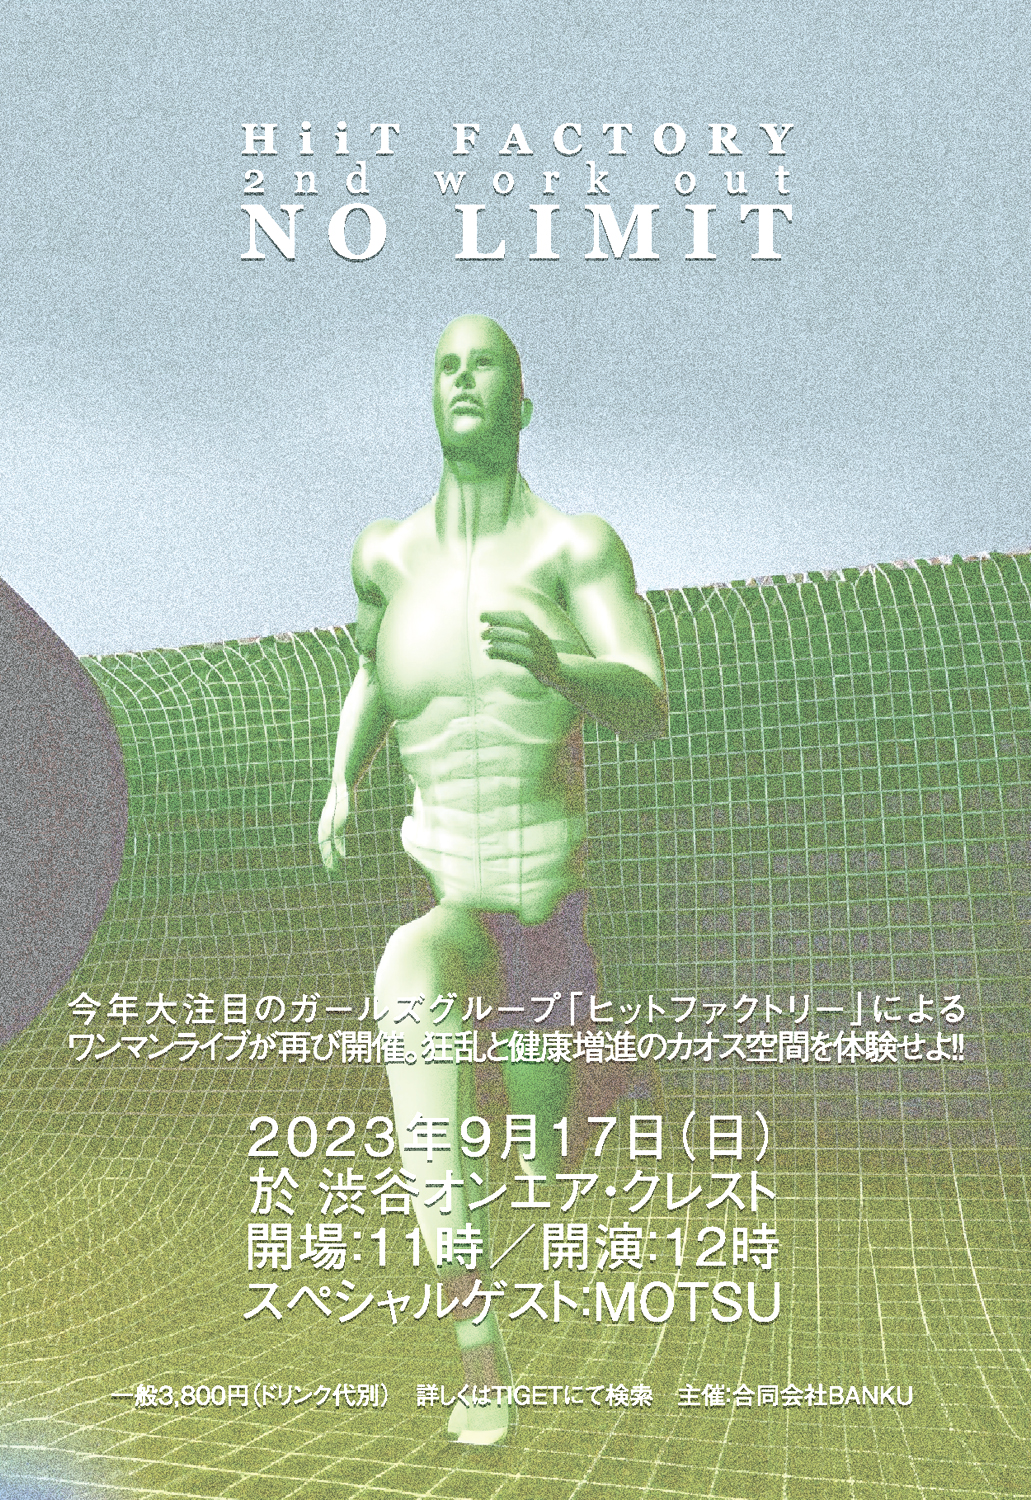 HiiT FACTORY 2nd Work Out "No Limit"